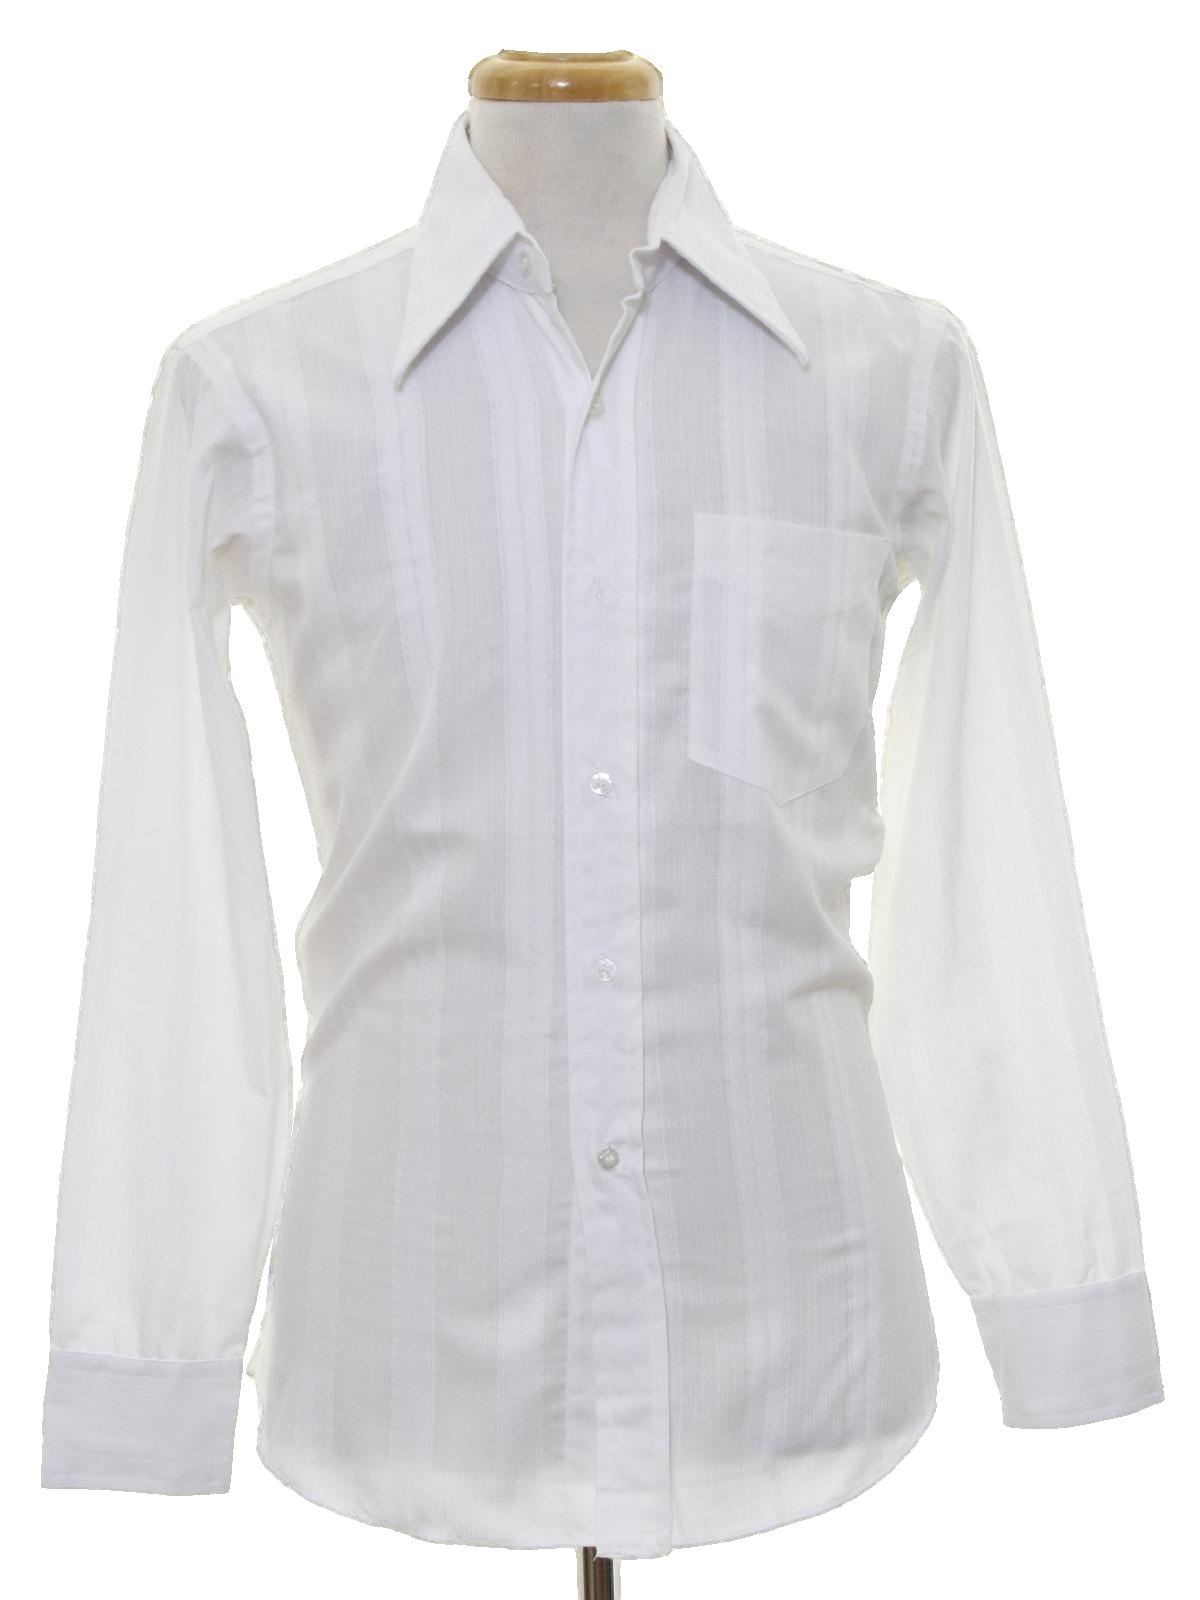 Yeungs Shirts 1970s Vintage Shirt: 70s -Yeungs Shirts- Mens white with